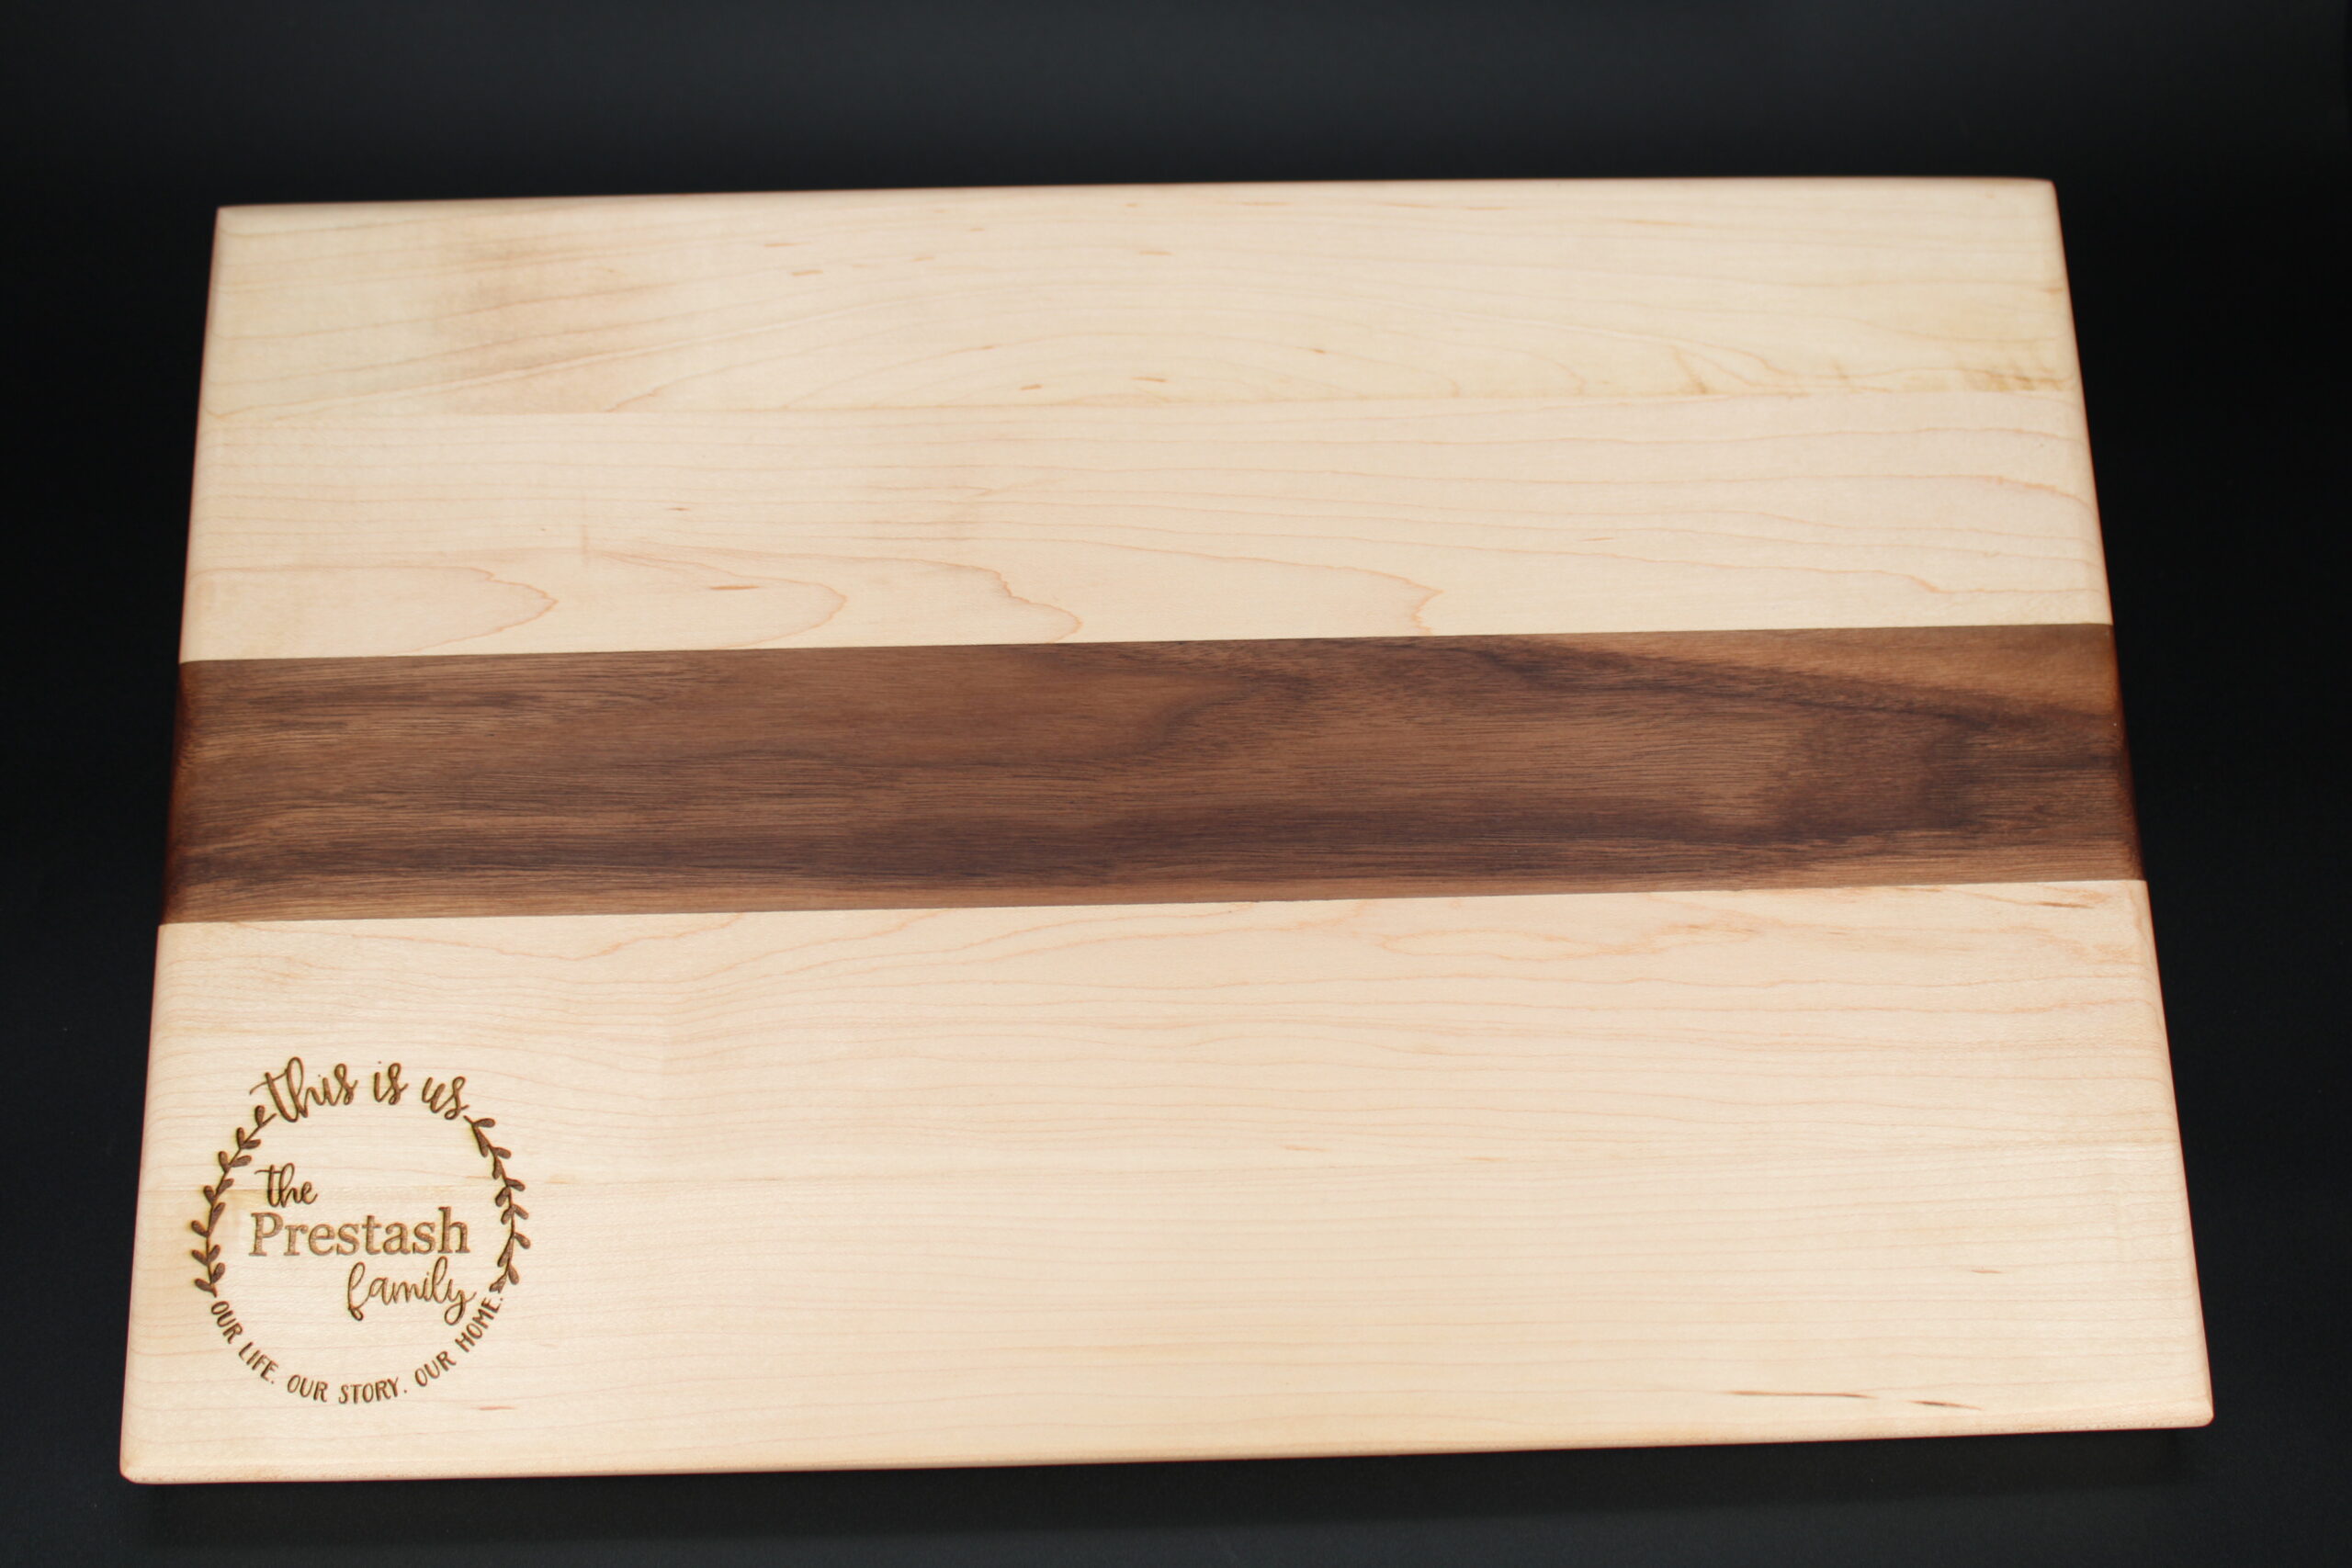 custom wreath engraved on Maple and Walnut cutting board/charcuterie board as a closing gift